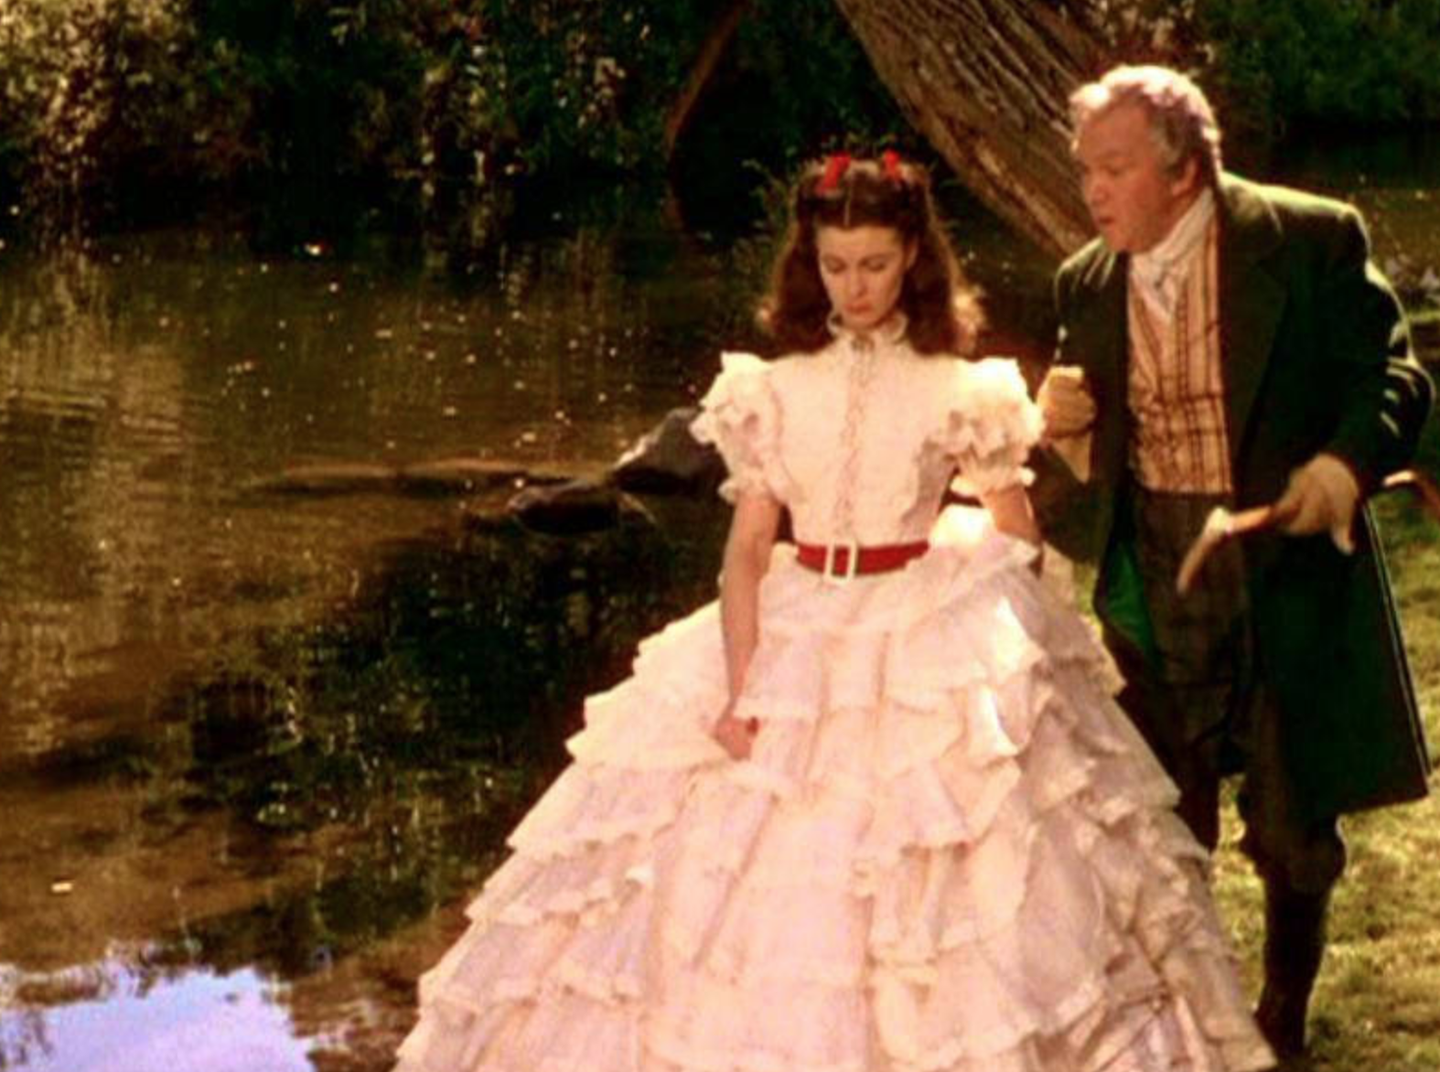 Vivian Leigh wearing the dress that inspired Ruth Hensinger's parachute dress in "Gone With The Wind." (MGM/ Loew's)